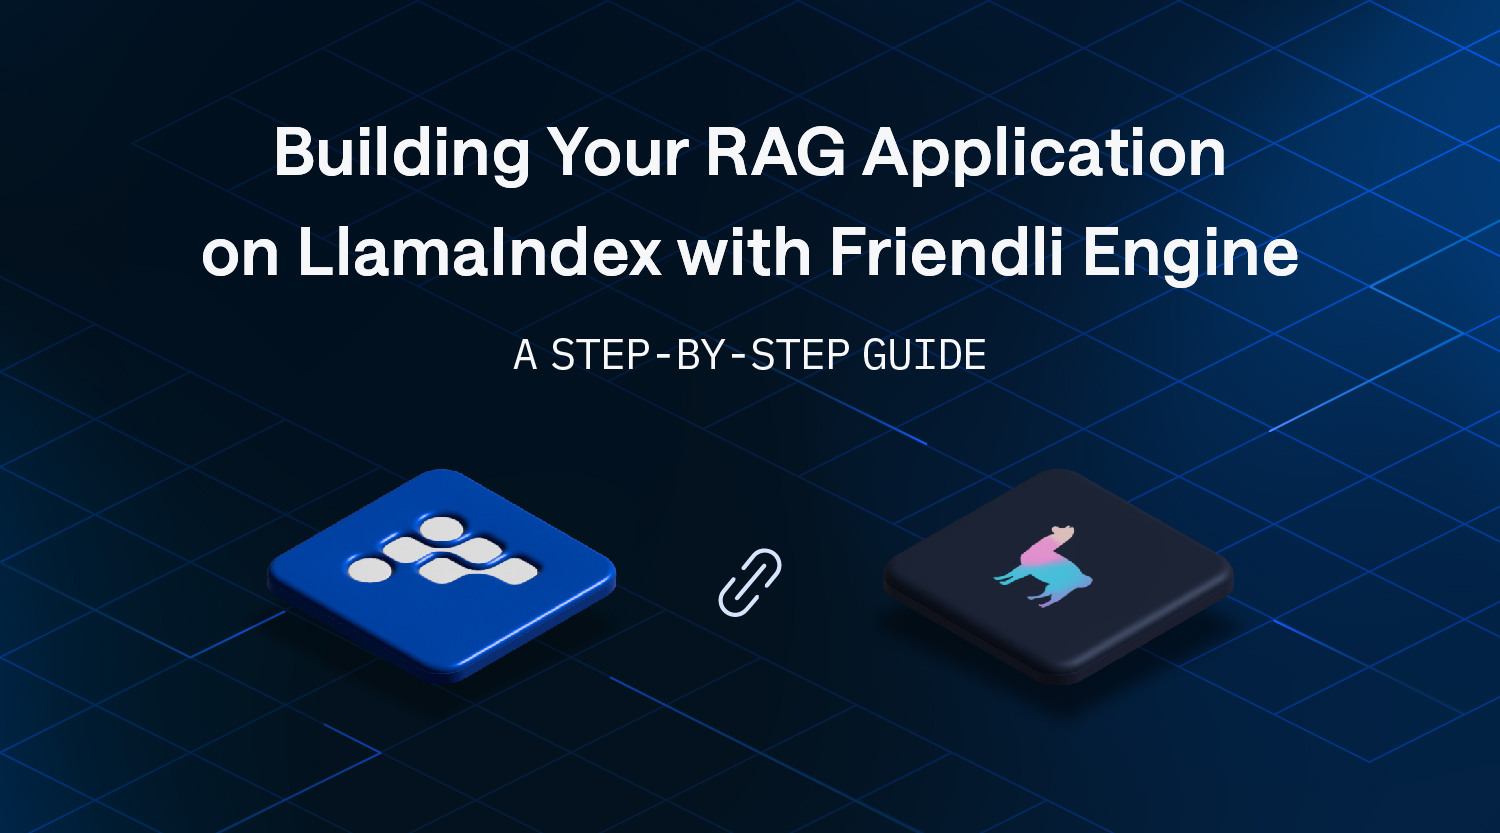 Building Your RAG Application on LlamaIndex with Friendli Engine: A Step-by-Step Guide thumbnail